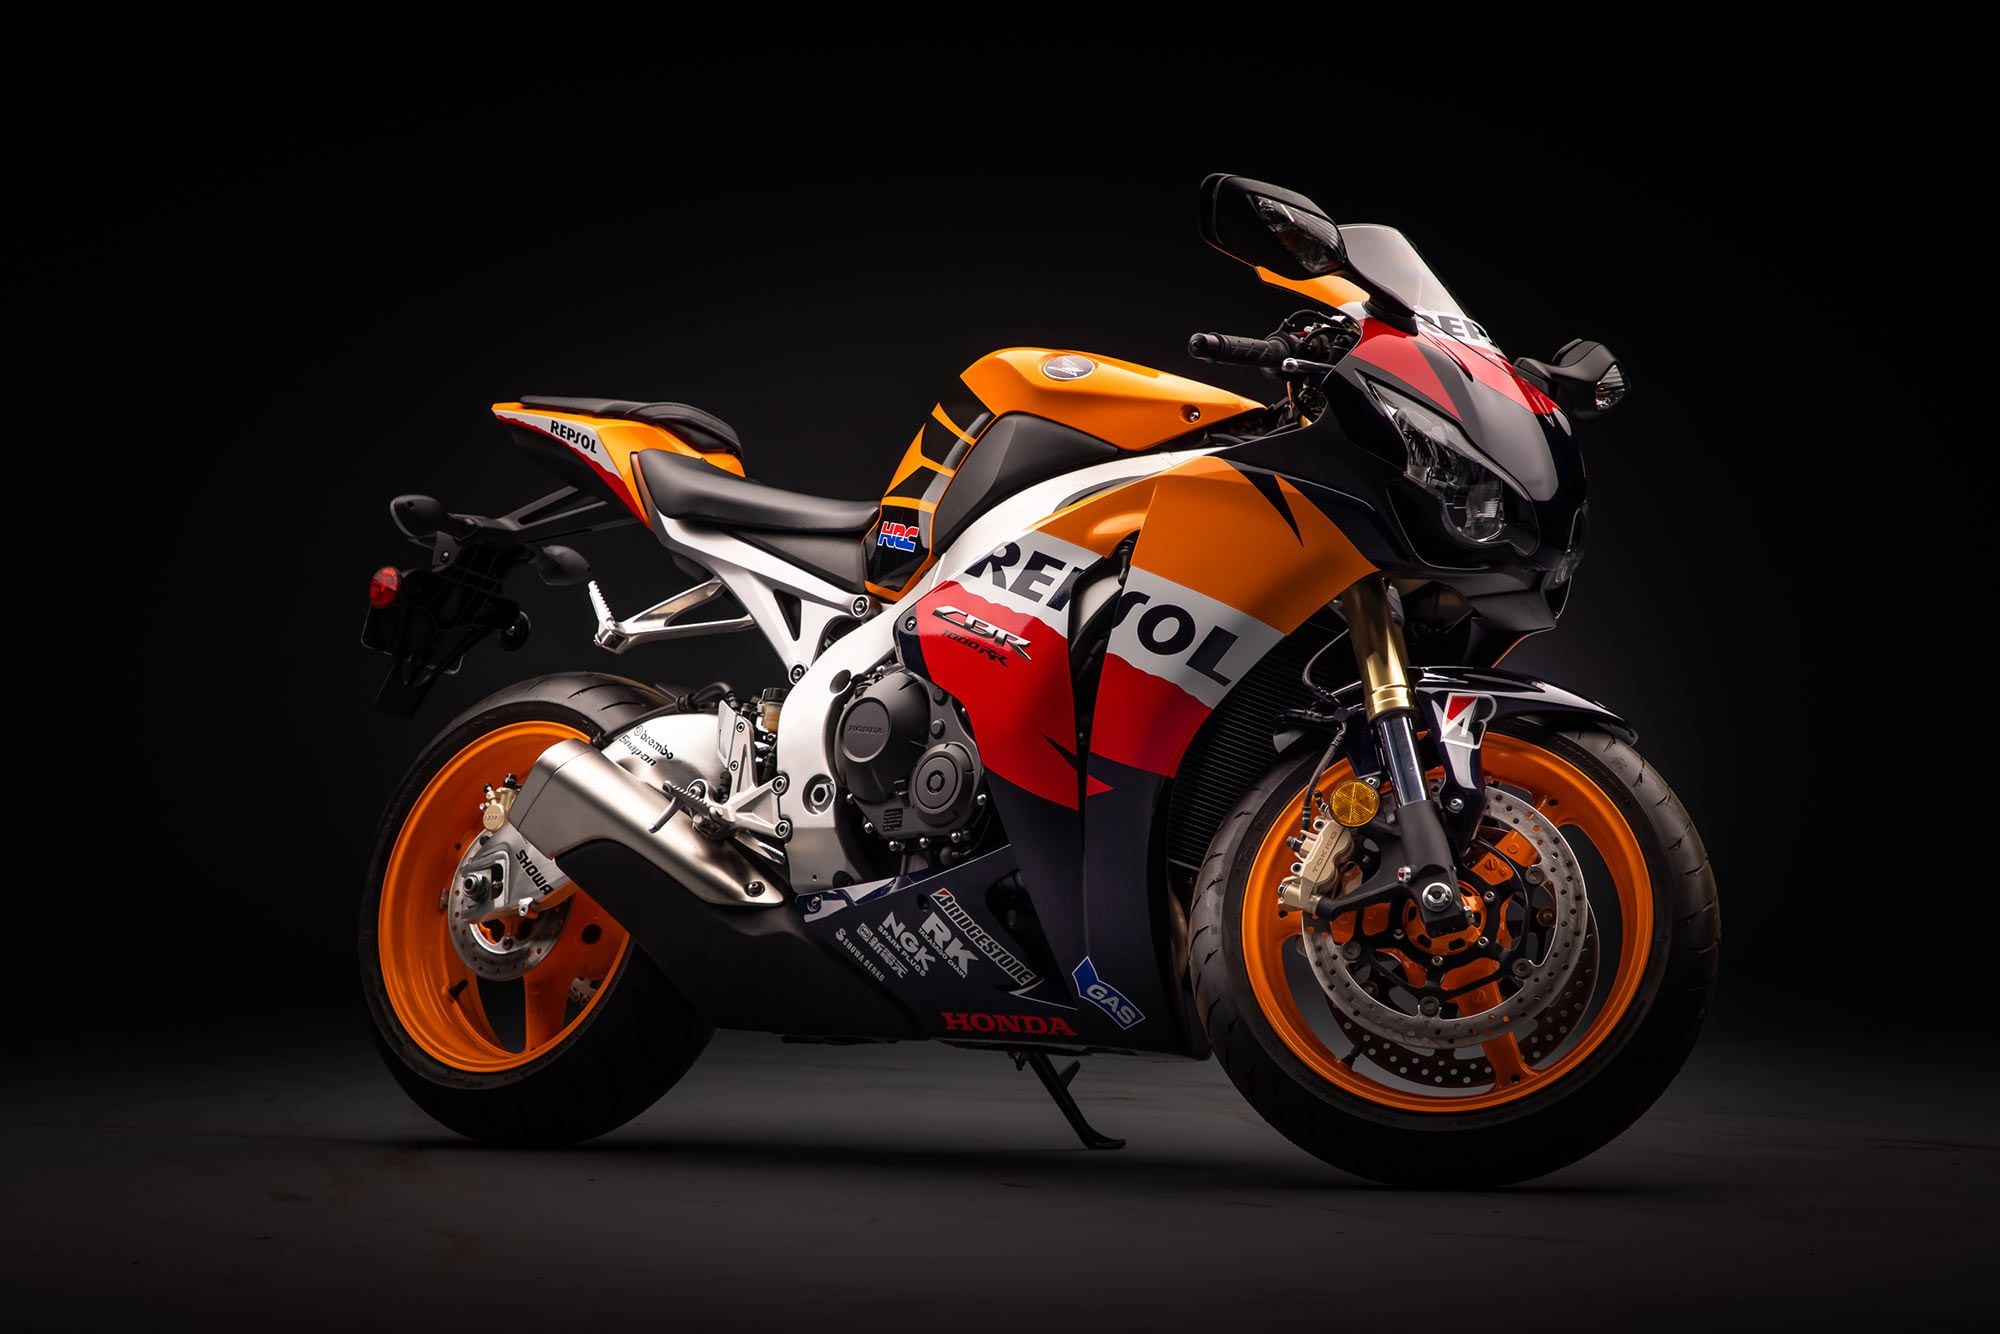 The 2009 Repsol CBR1000RR packs all the upgrades made after Honda’s first major overhaul of the platform in 2008.